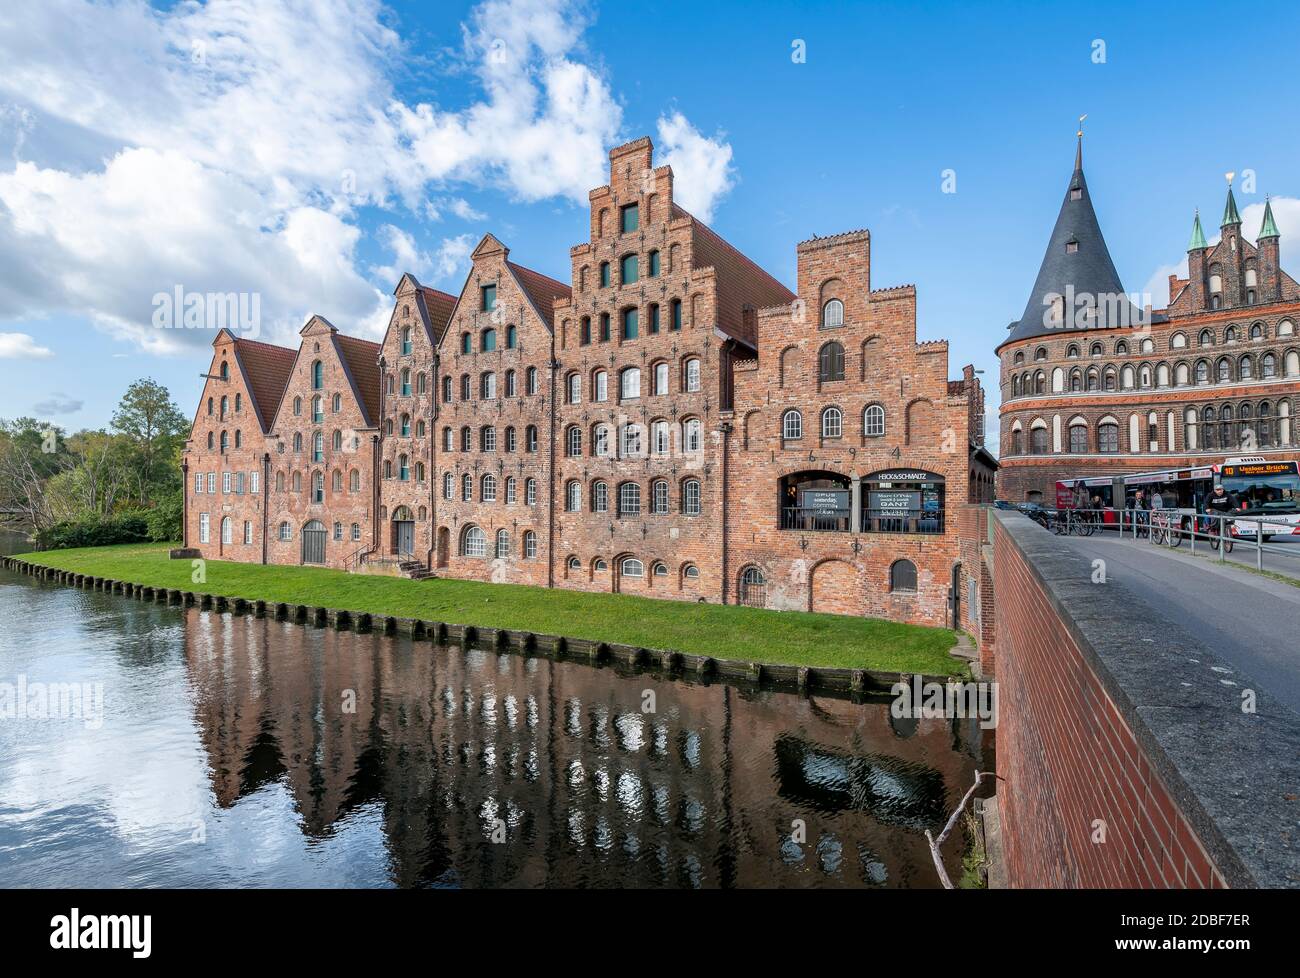 The Salzspeicher (salt storehouses), in Lübeck, northern Germany. Six historic brick buildings on the Upper Trave River next to the Holstentor. Stock Photo